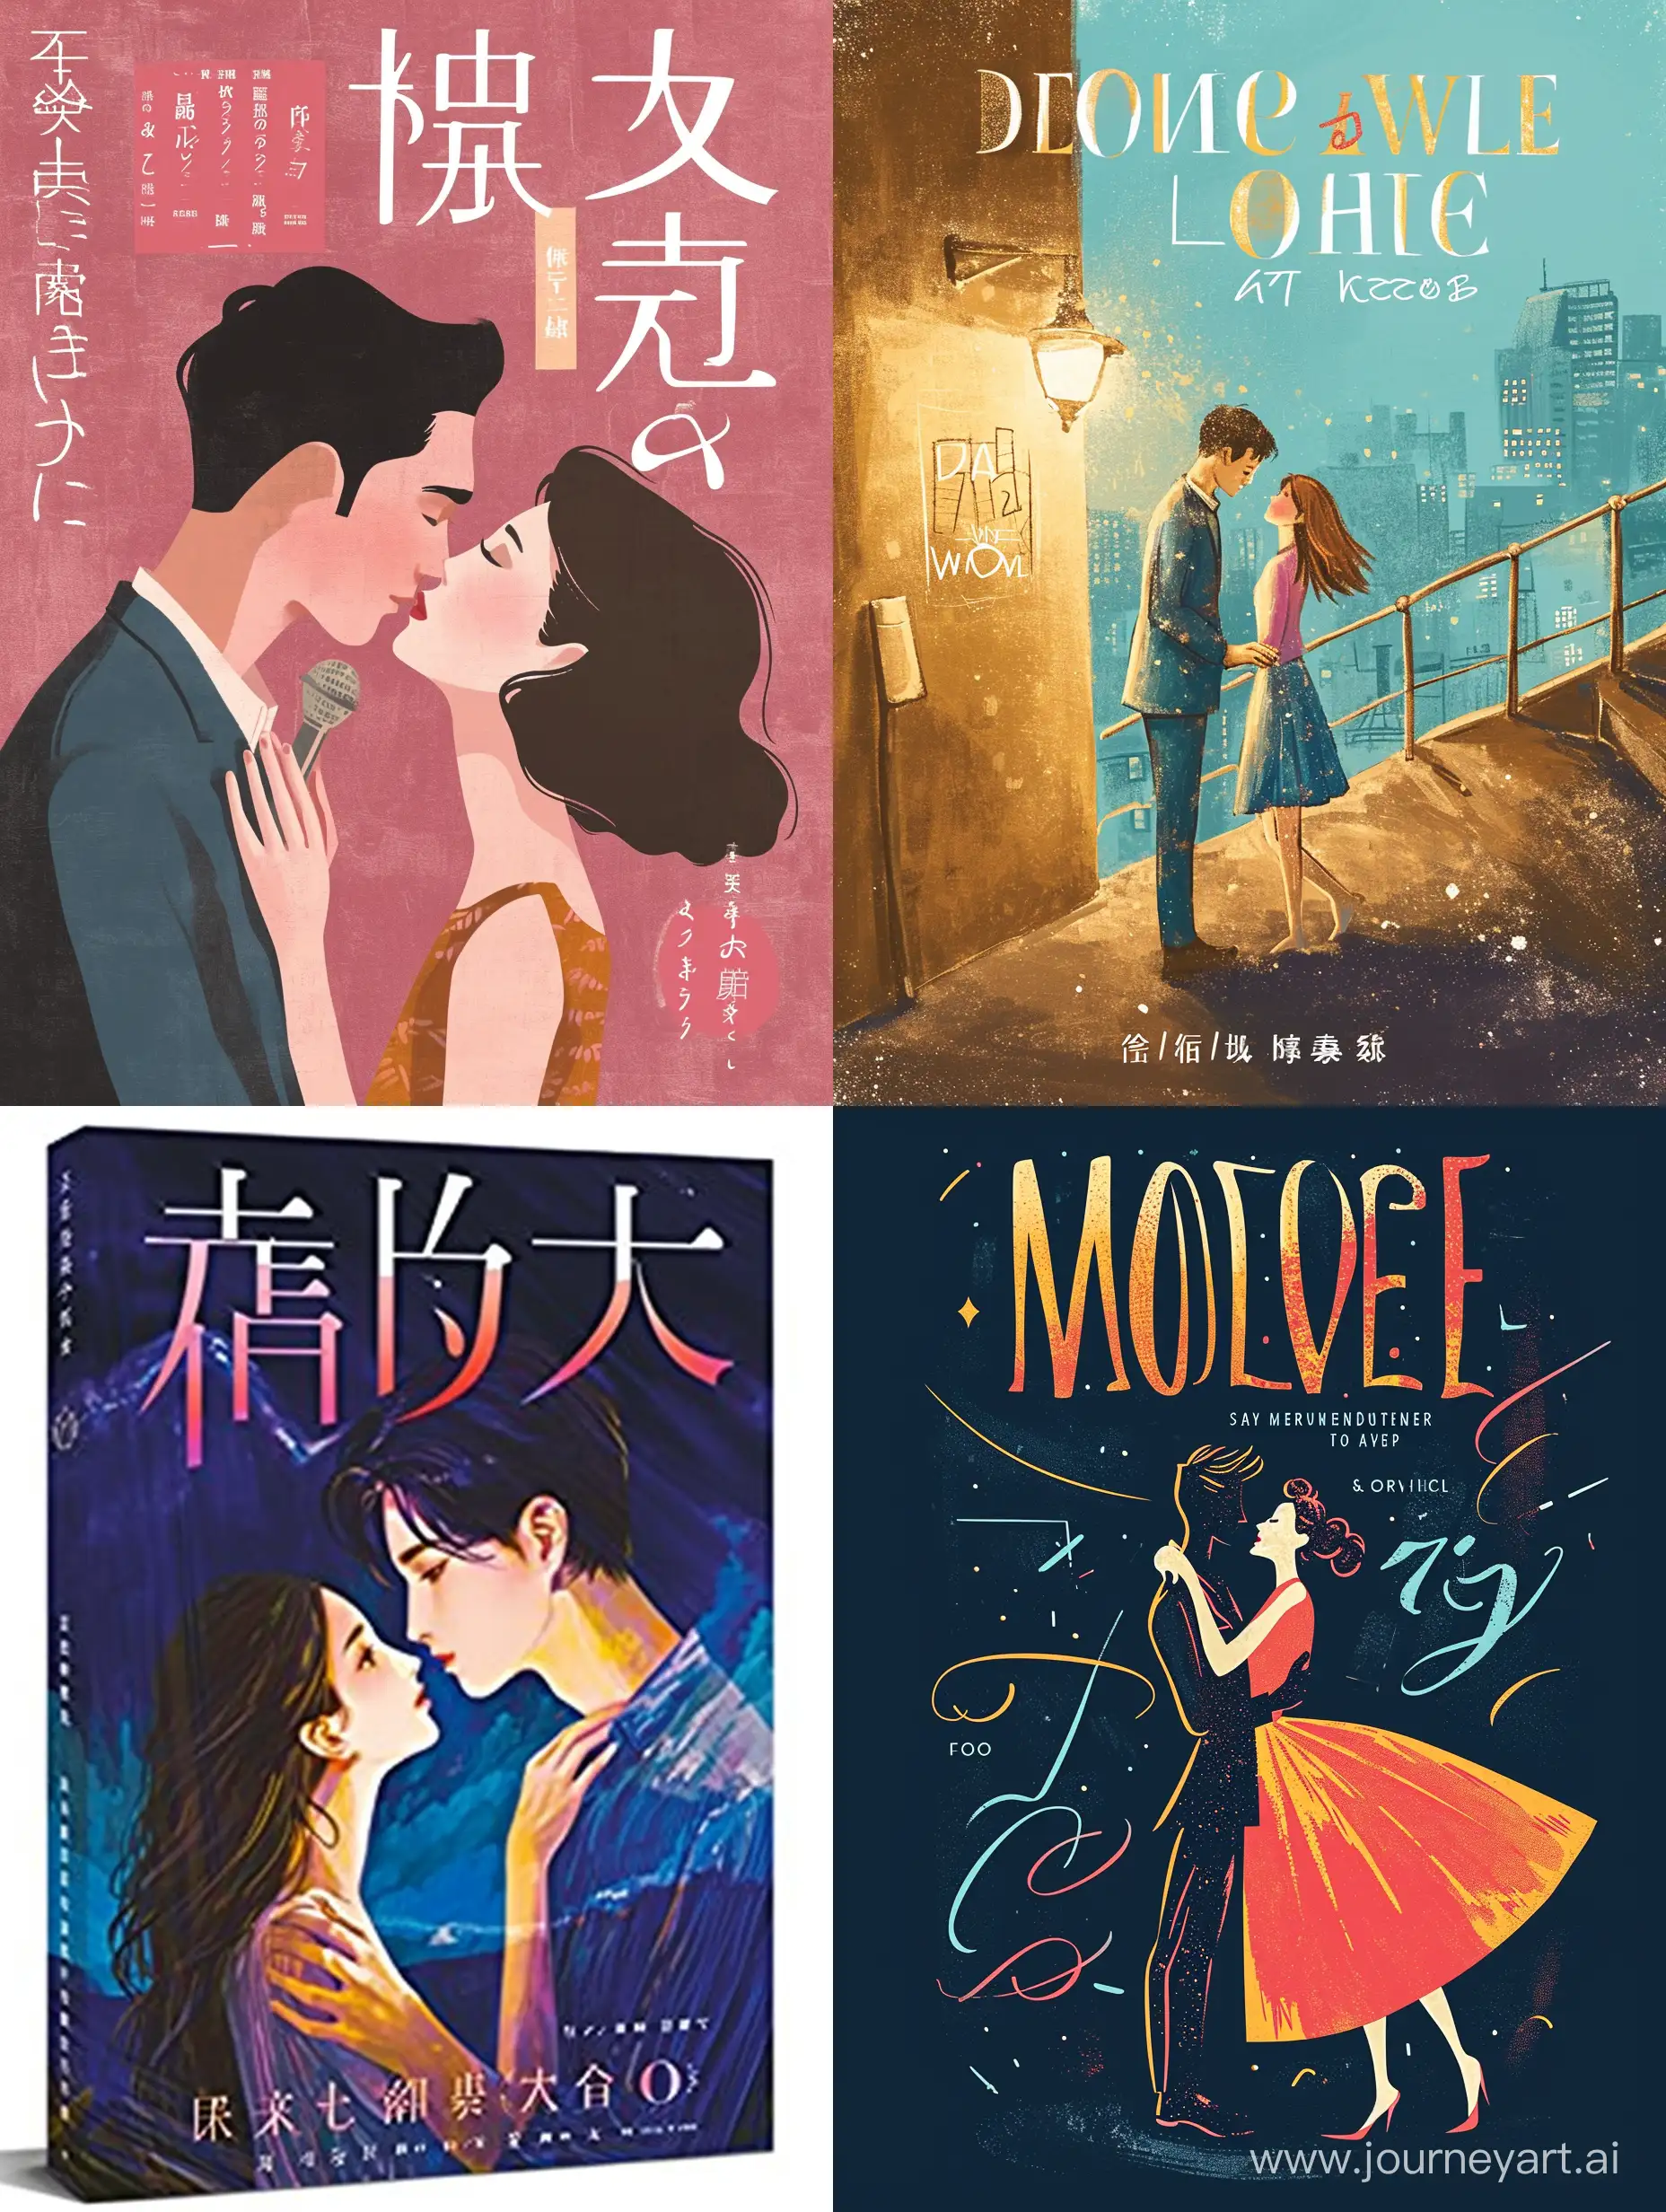 Modern-Love-Novel-Cover-with-Versatile-Visuals